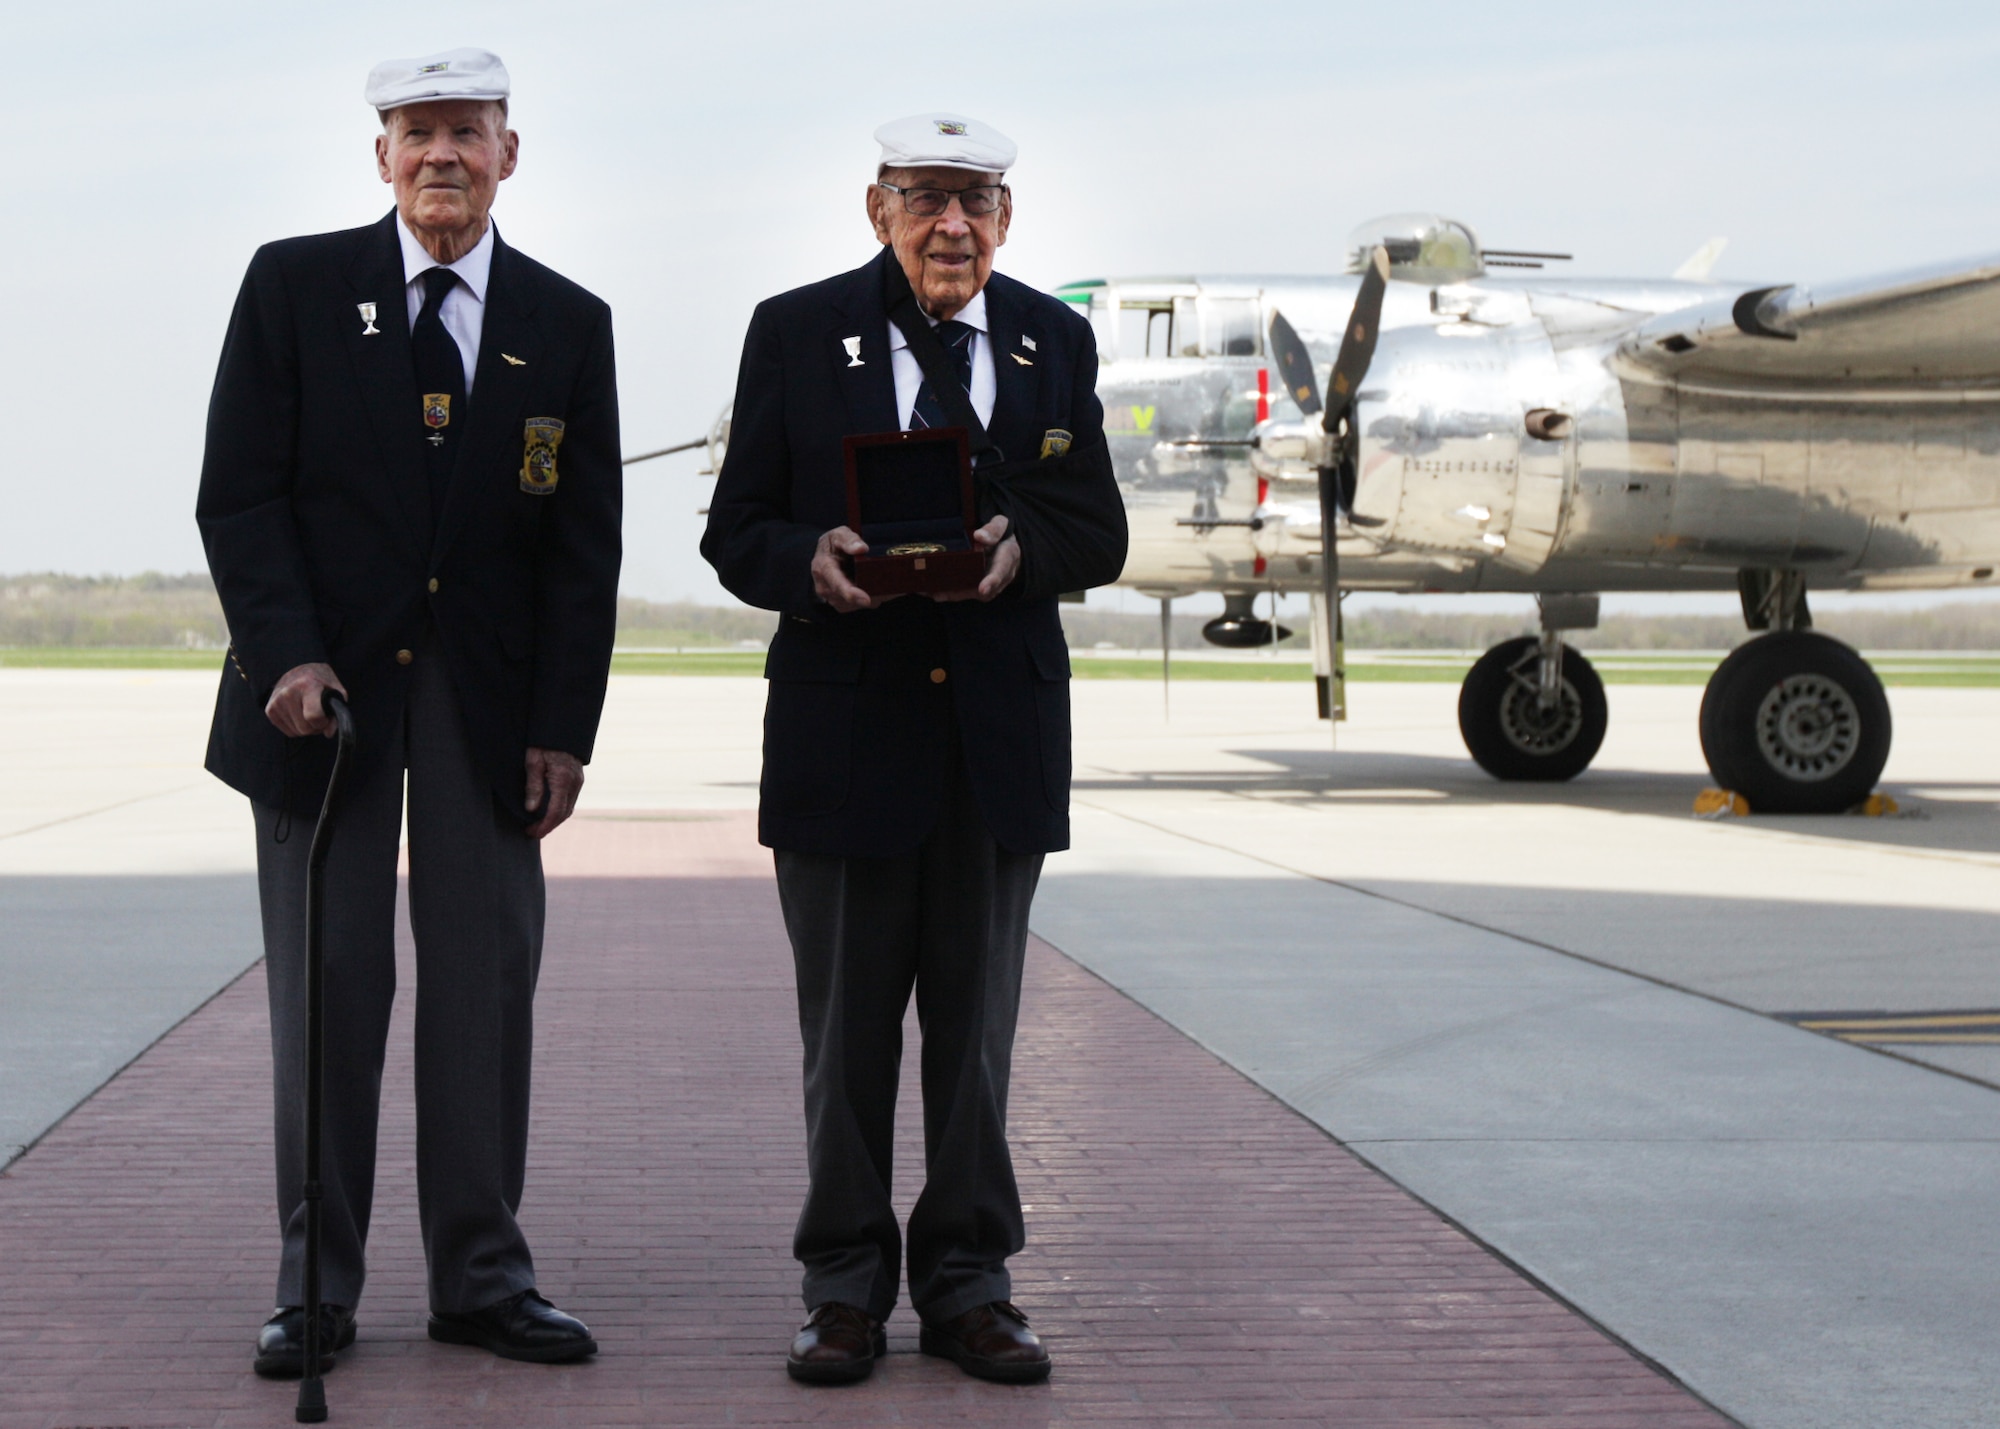 Doolittle Raiders retired Lt. Col. Dick Cole and former Staff Sgt. David Thatcher pose with the Congressional Gold Medal after it arrived at Wright-Patterson Air Force Base, Ohio, following a ceremonial flight on board the B-25 “Panchito” April 18, 2015. The medal is on display in the museum’s World War II Gallery in the Doolittle Raid exhibit. (U.S. Air Force photo/Will Haas)